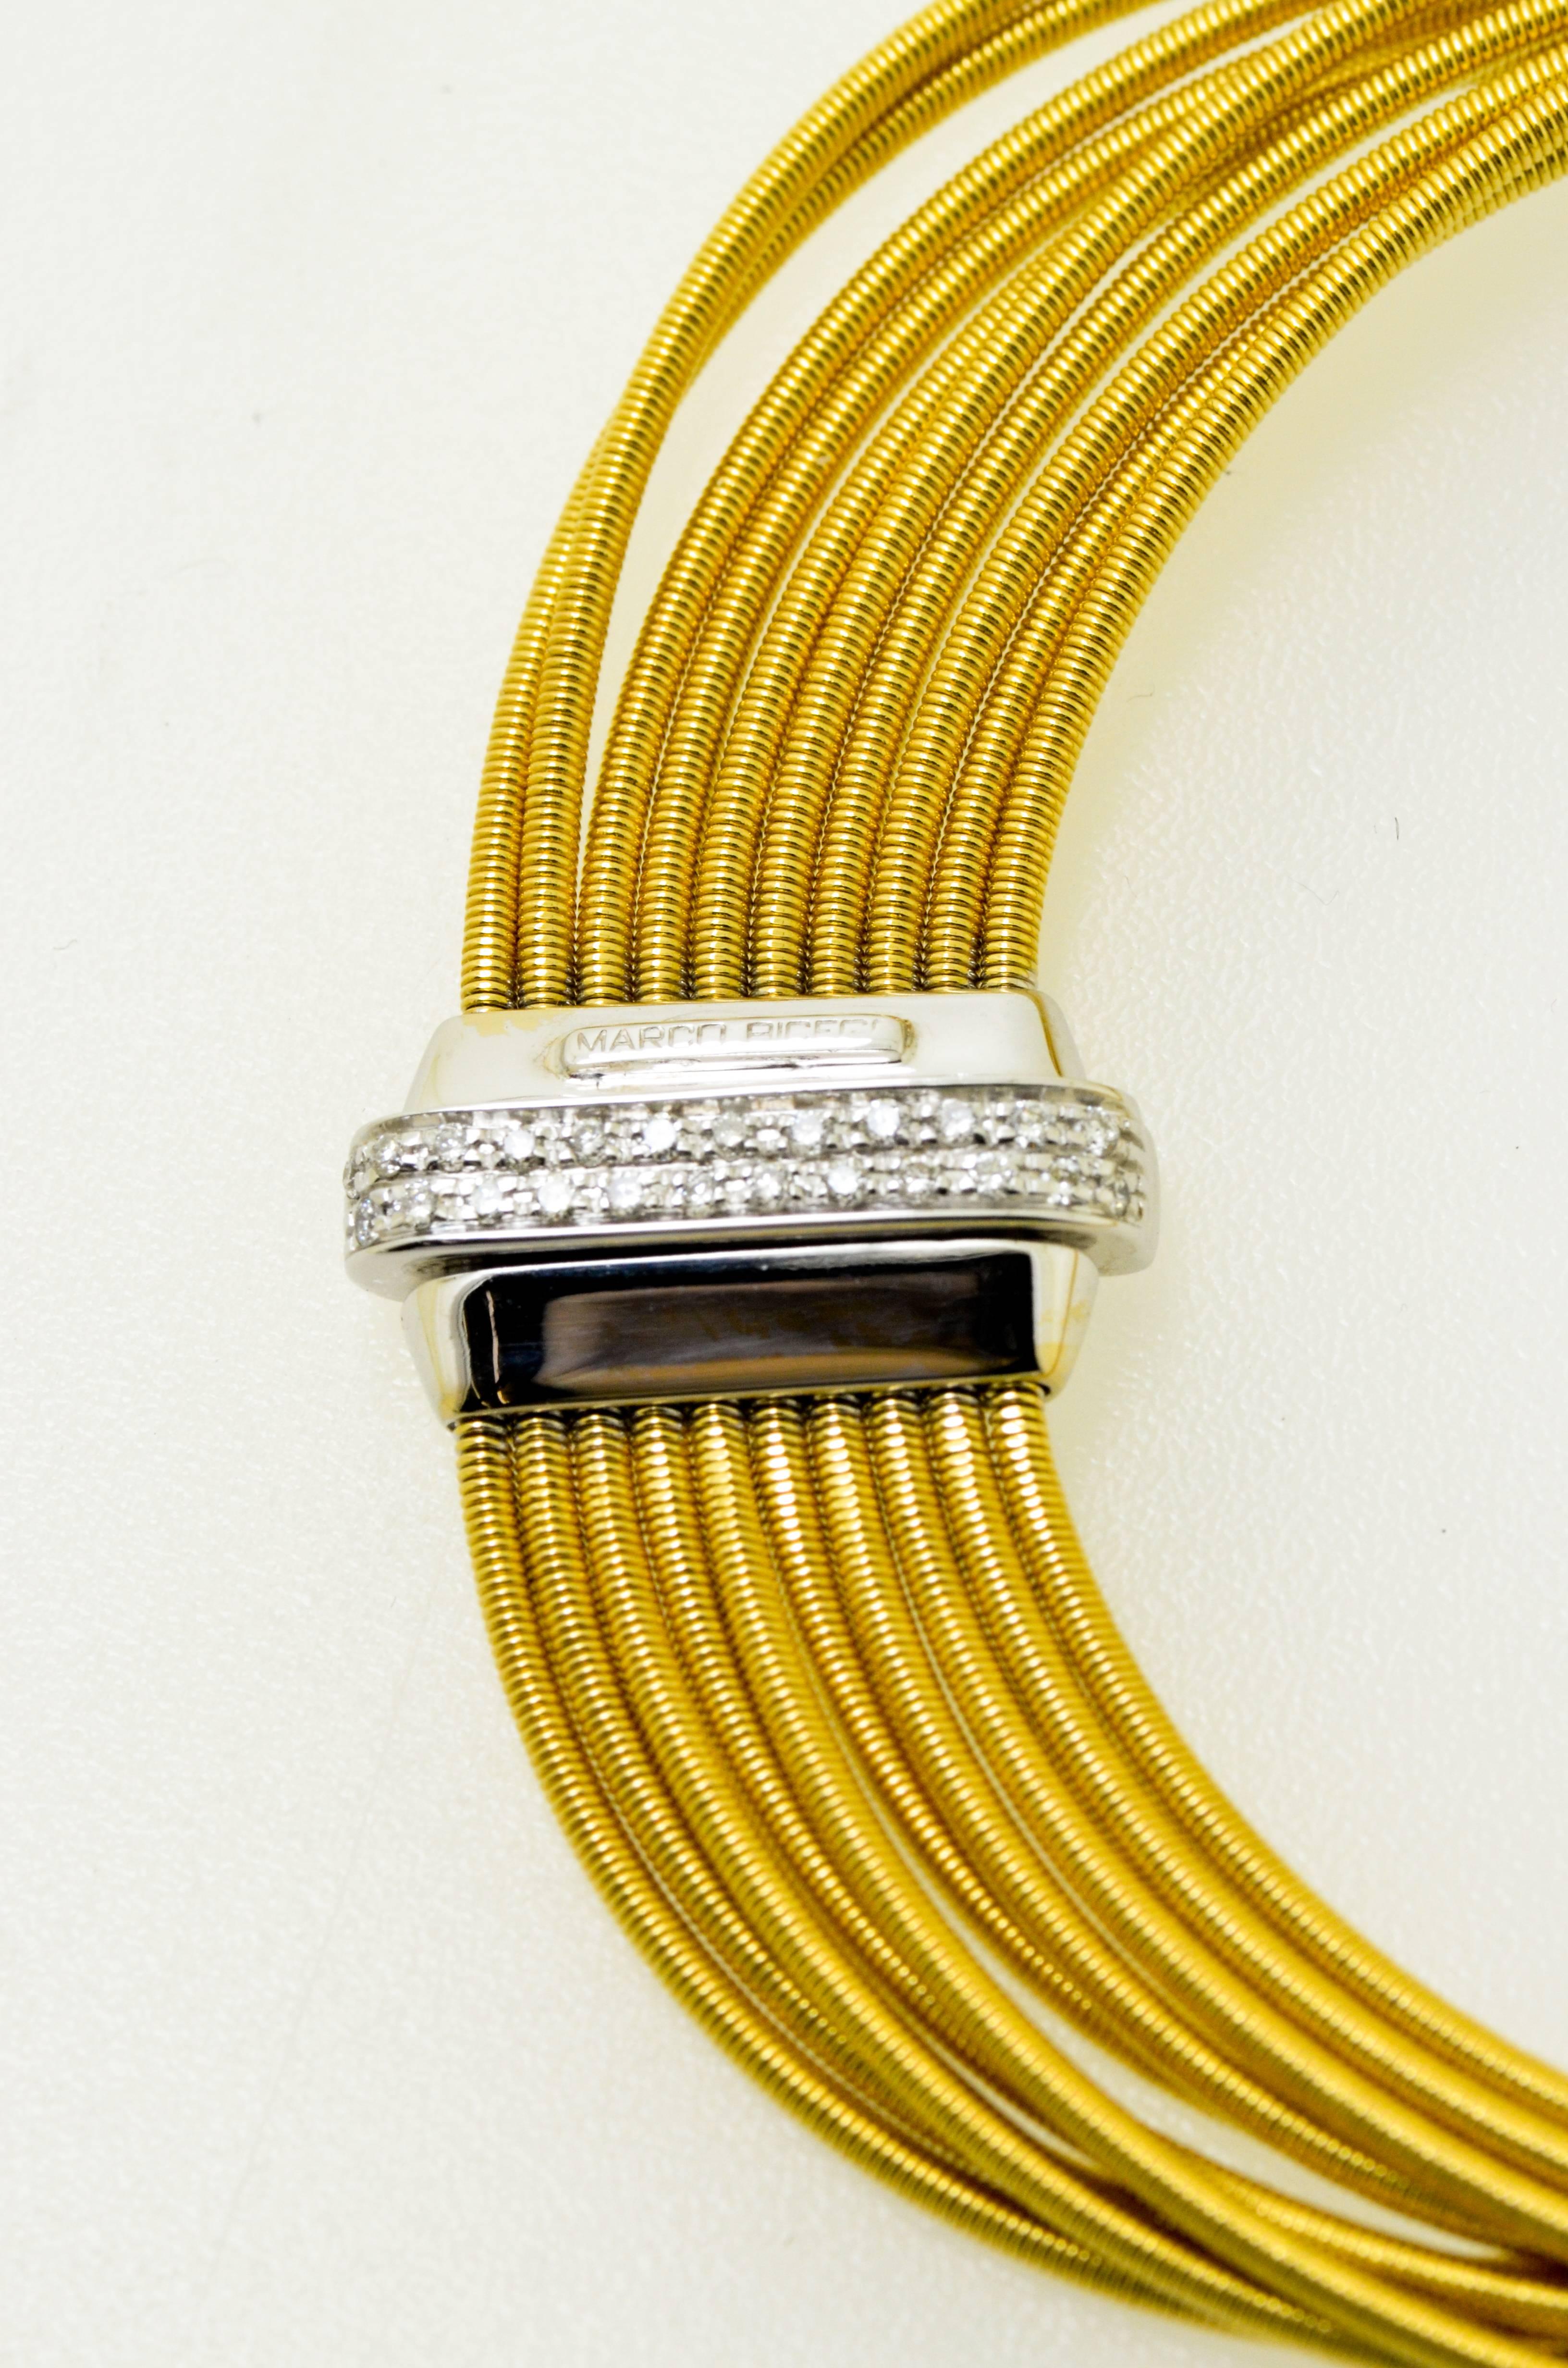 Distinctive and luxurious, the signature texture of this gold bracelet is the result of fine gold thread meticulously wrapped around a gold core.

18K yellow gold 10 strand bracelet with diamond clasp from the Cairo Collection from italation